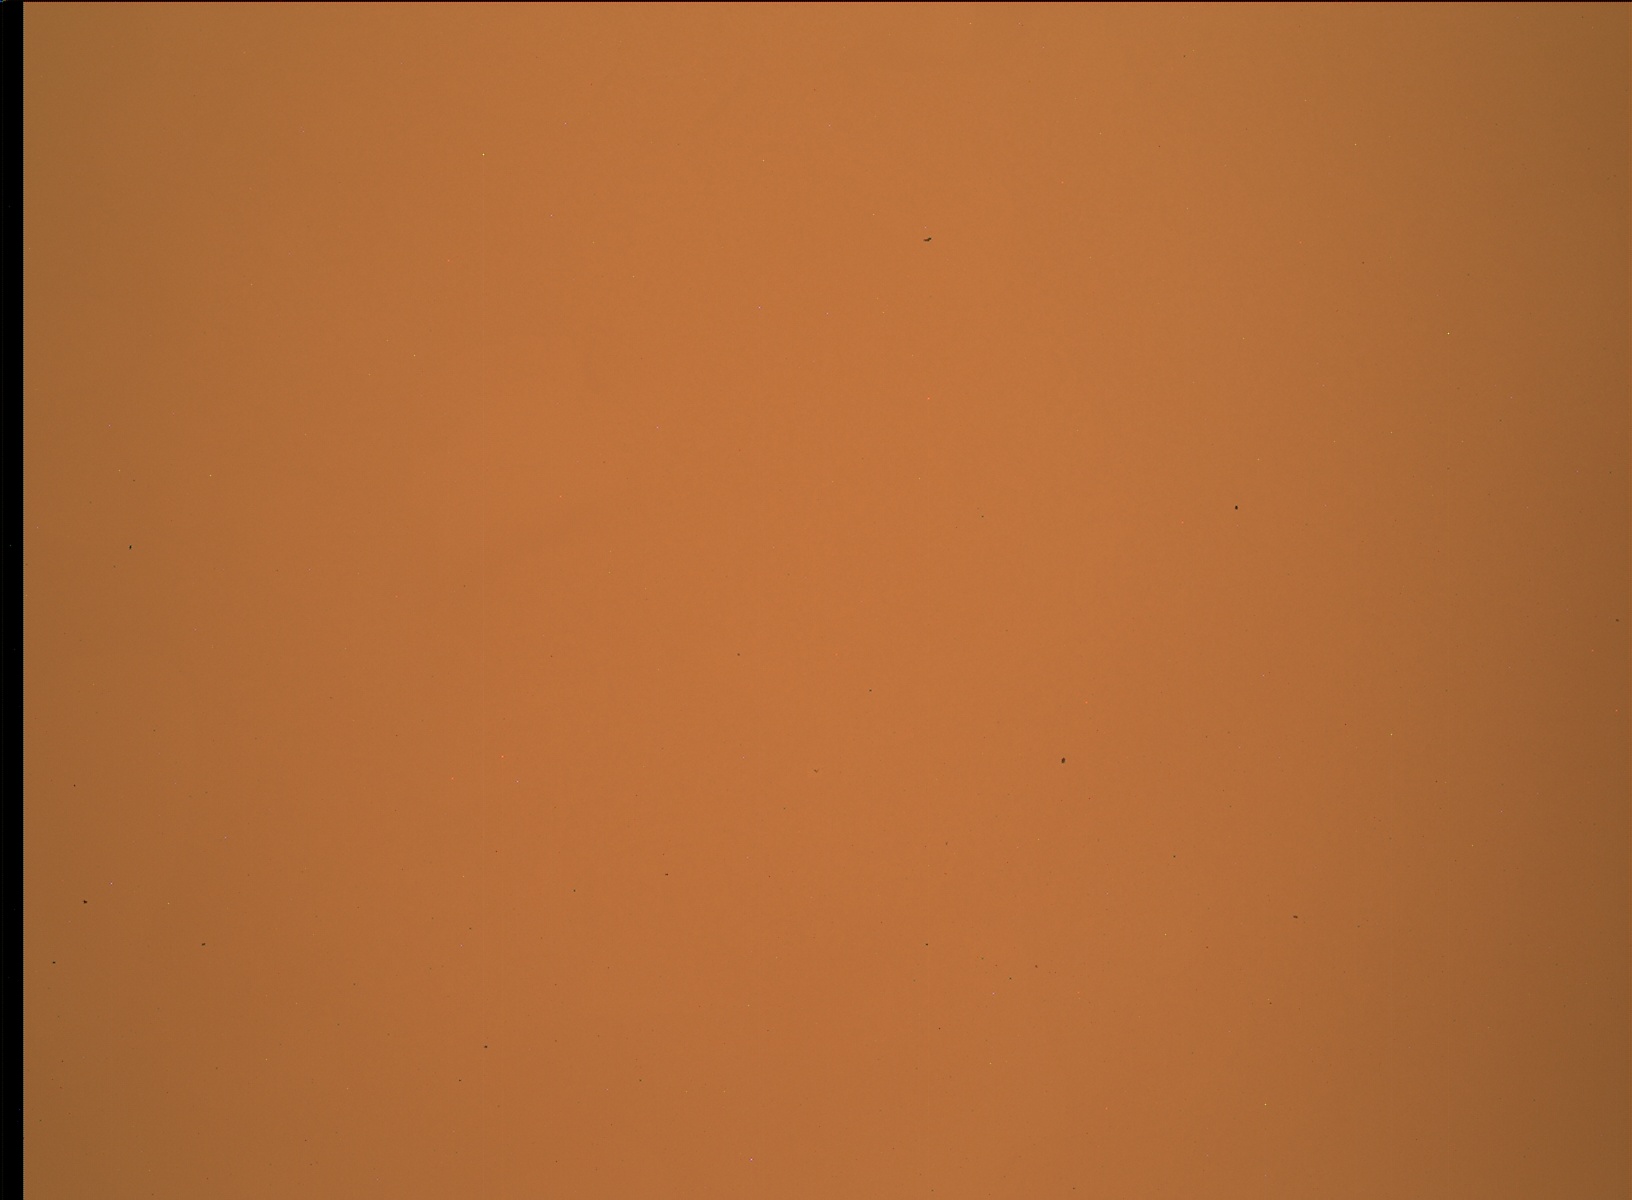 Nasa's Mars rover Curiosity acquired this image using its Mars Hand Lens Imager (MAHLI) on Sol 2292